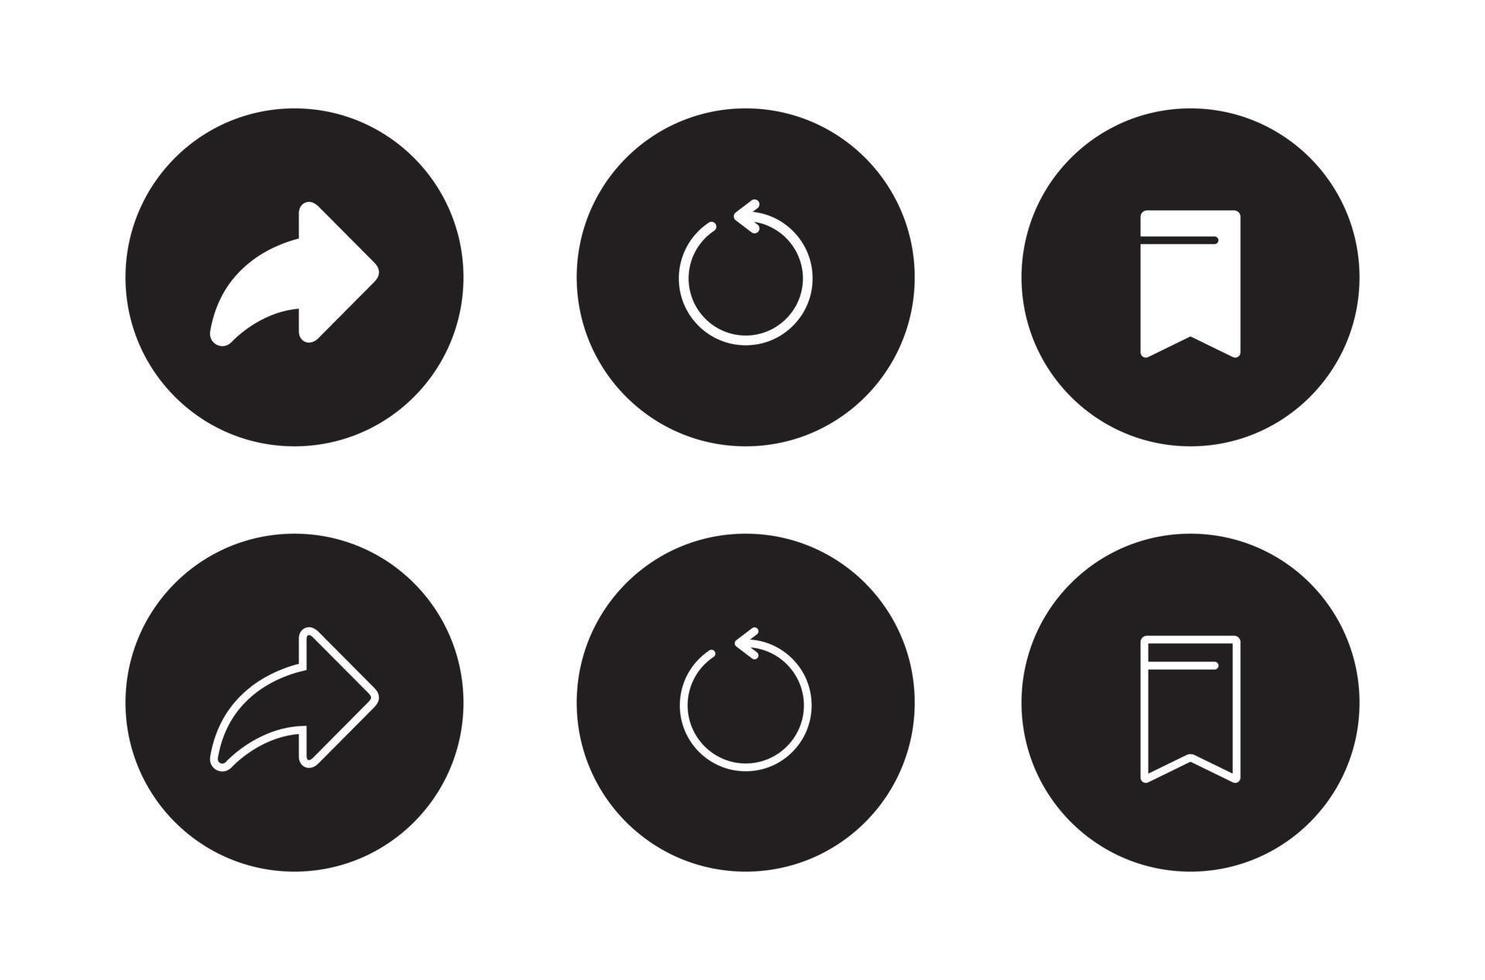 Share, Reload, and Save Icon Vector in Circle Button